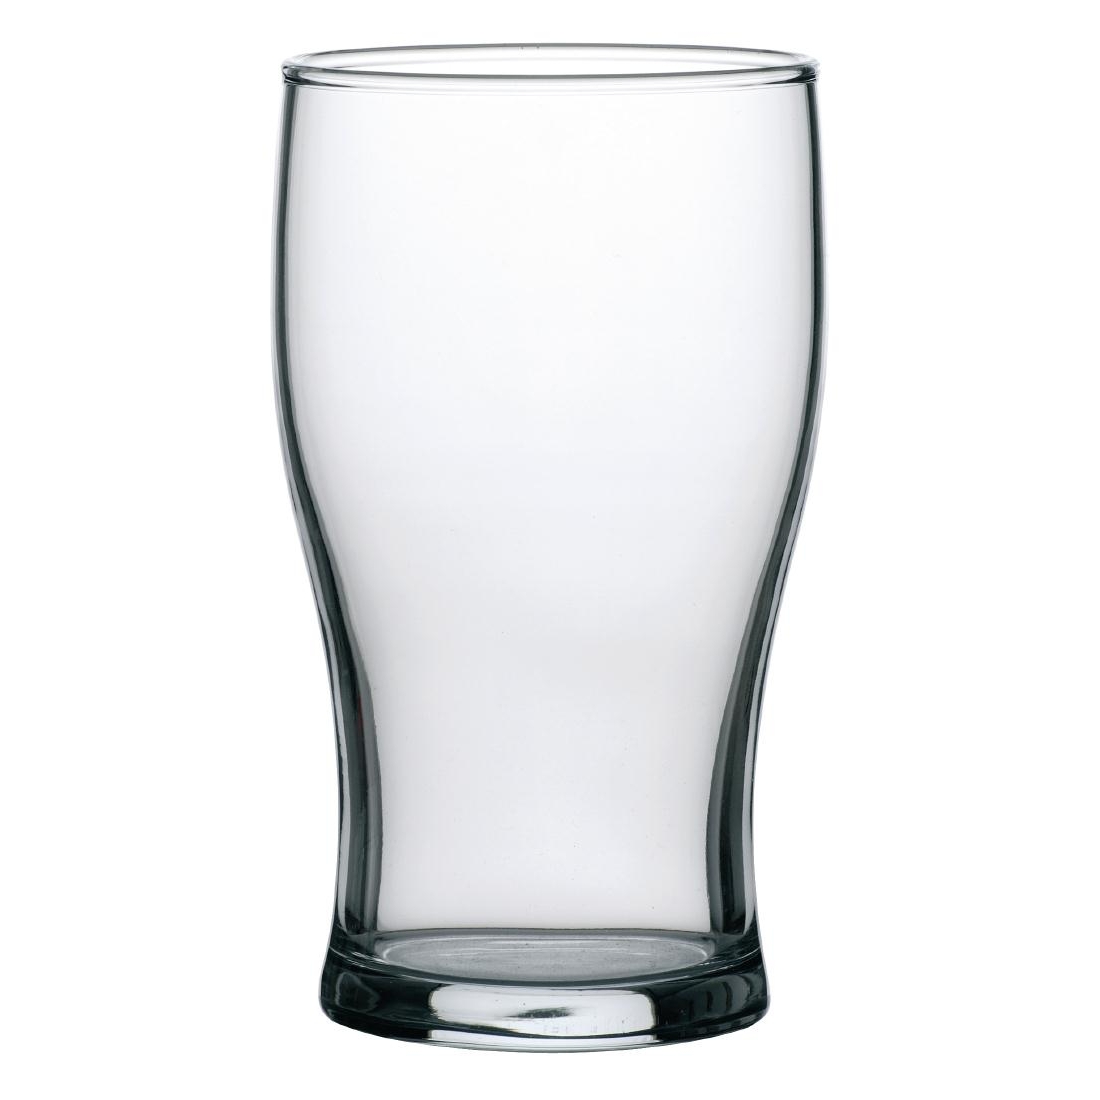 Arcoroc Tulip Beer Glasses 285ml CE Marked